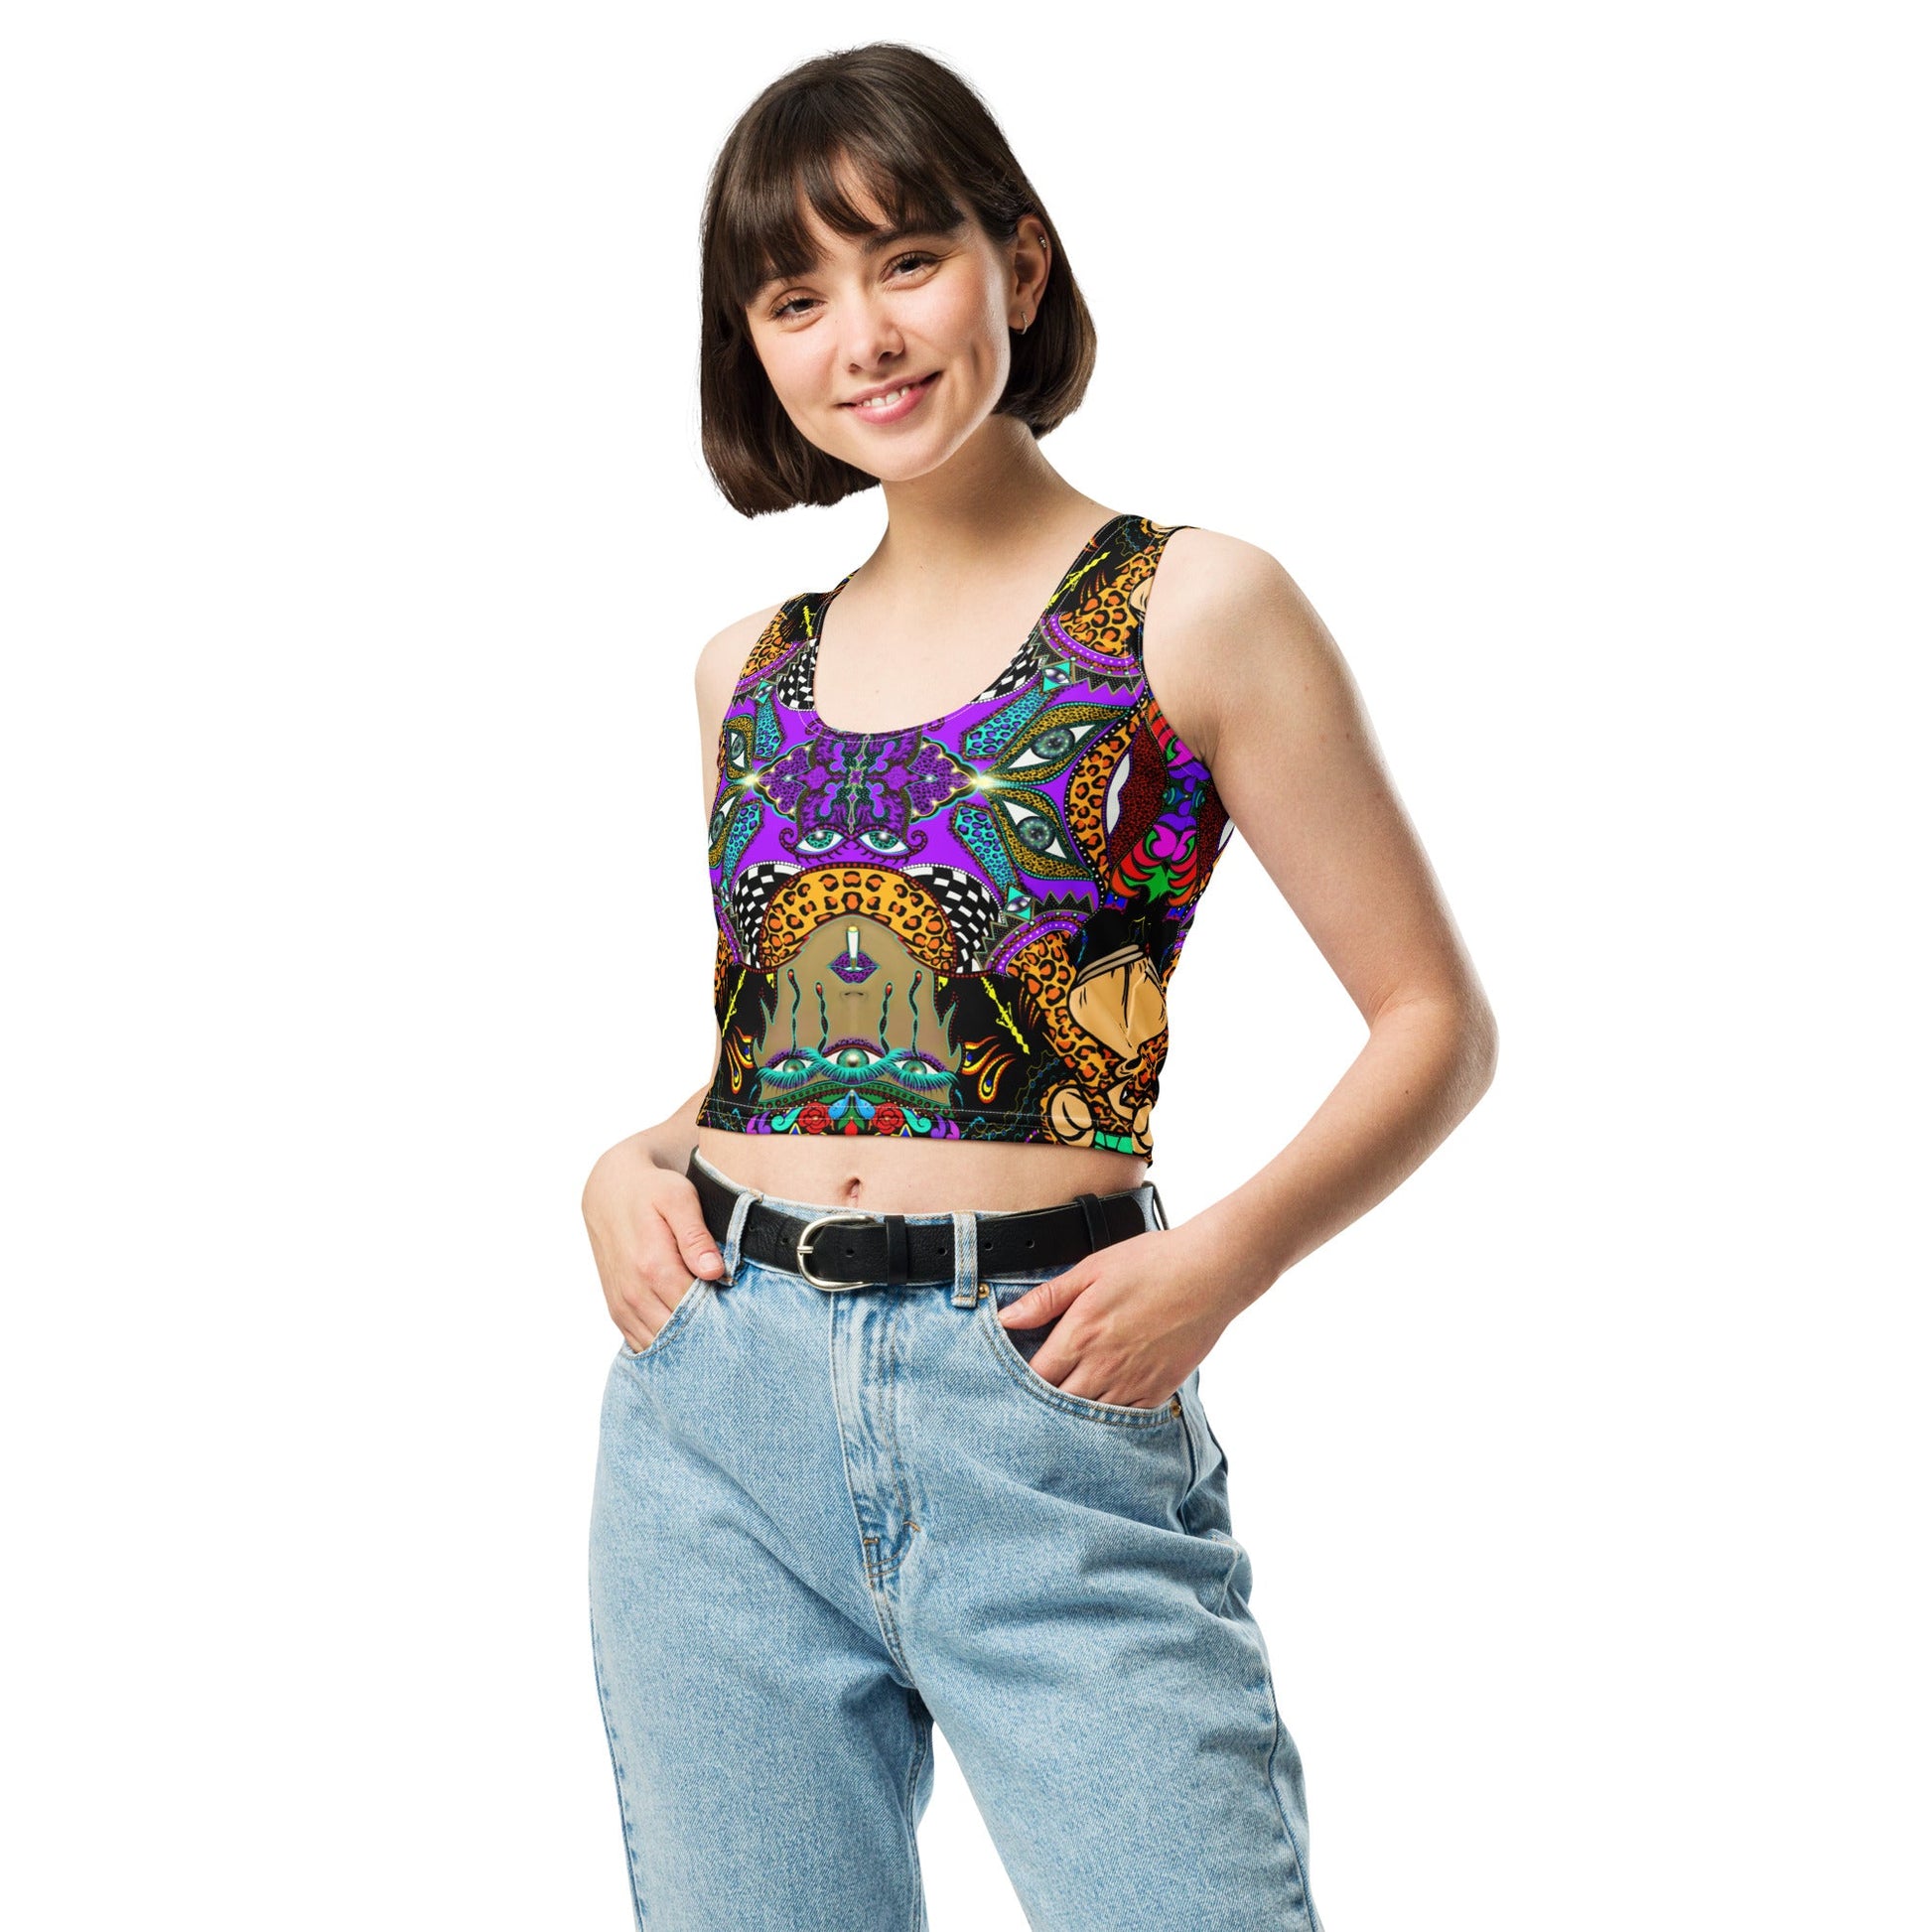 all-over-printed-crop-top-my-apes-pattern